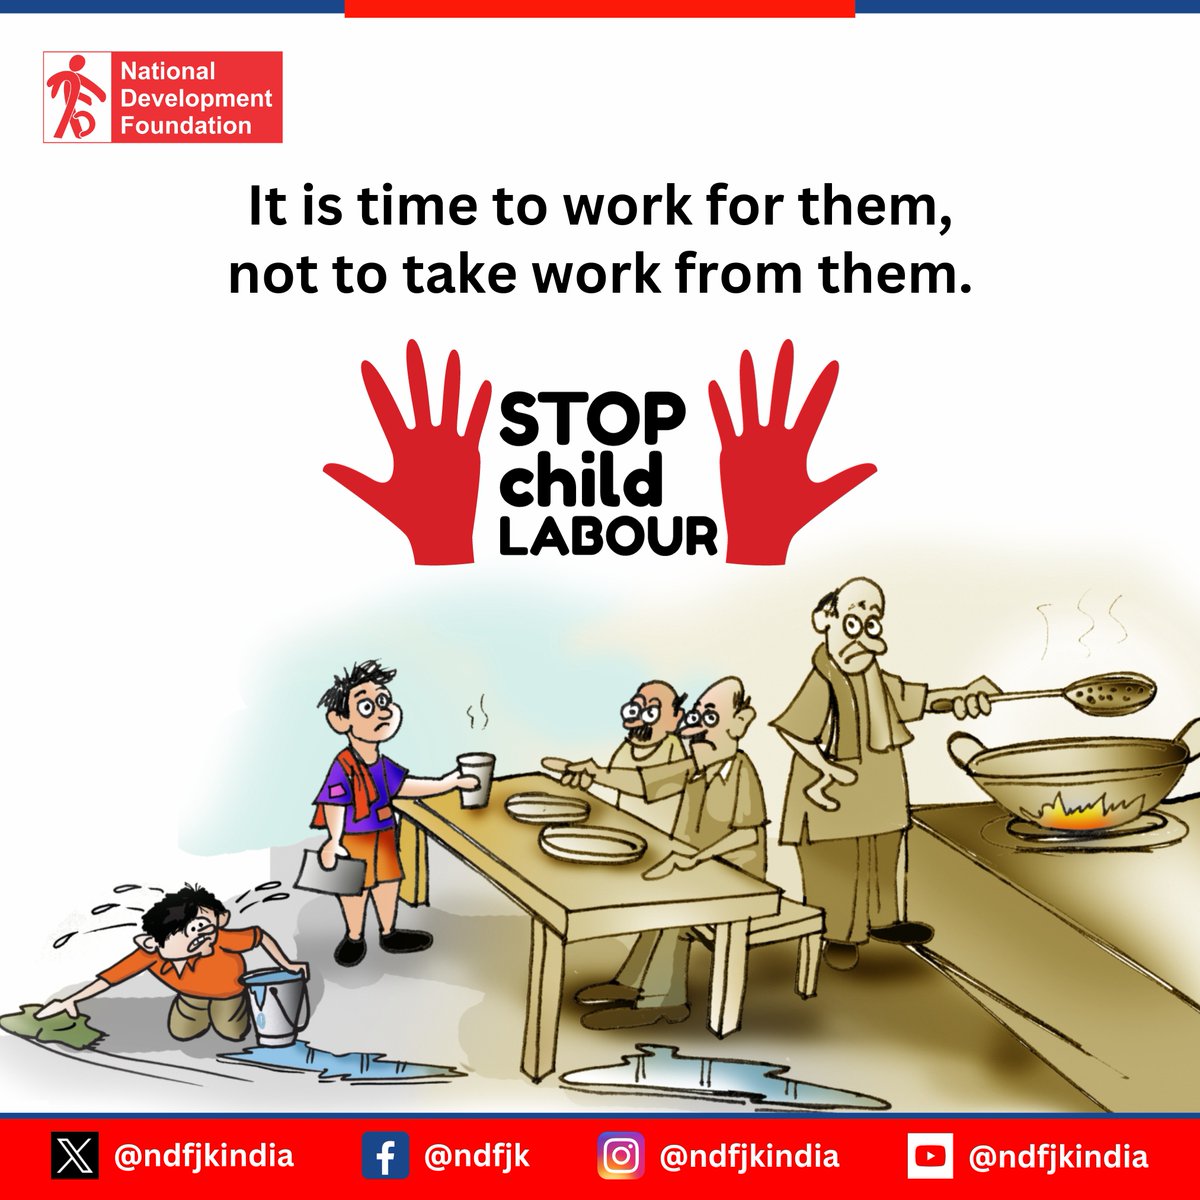 Say No to Child Labour ❌
Like & Share - Follow @ndfjkindia 

#childlabour #stopchildlabour #children #education #childlabourfree #childlabourers #NDF #ndfjkindia